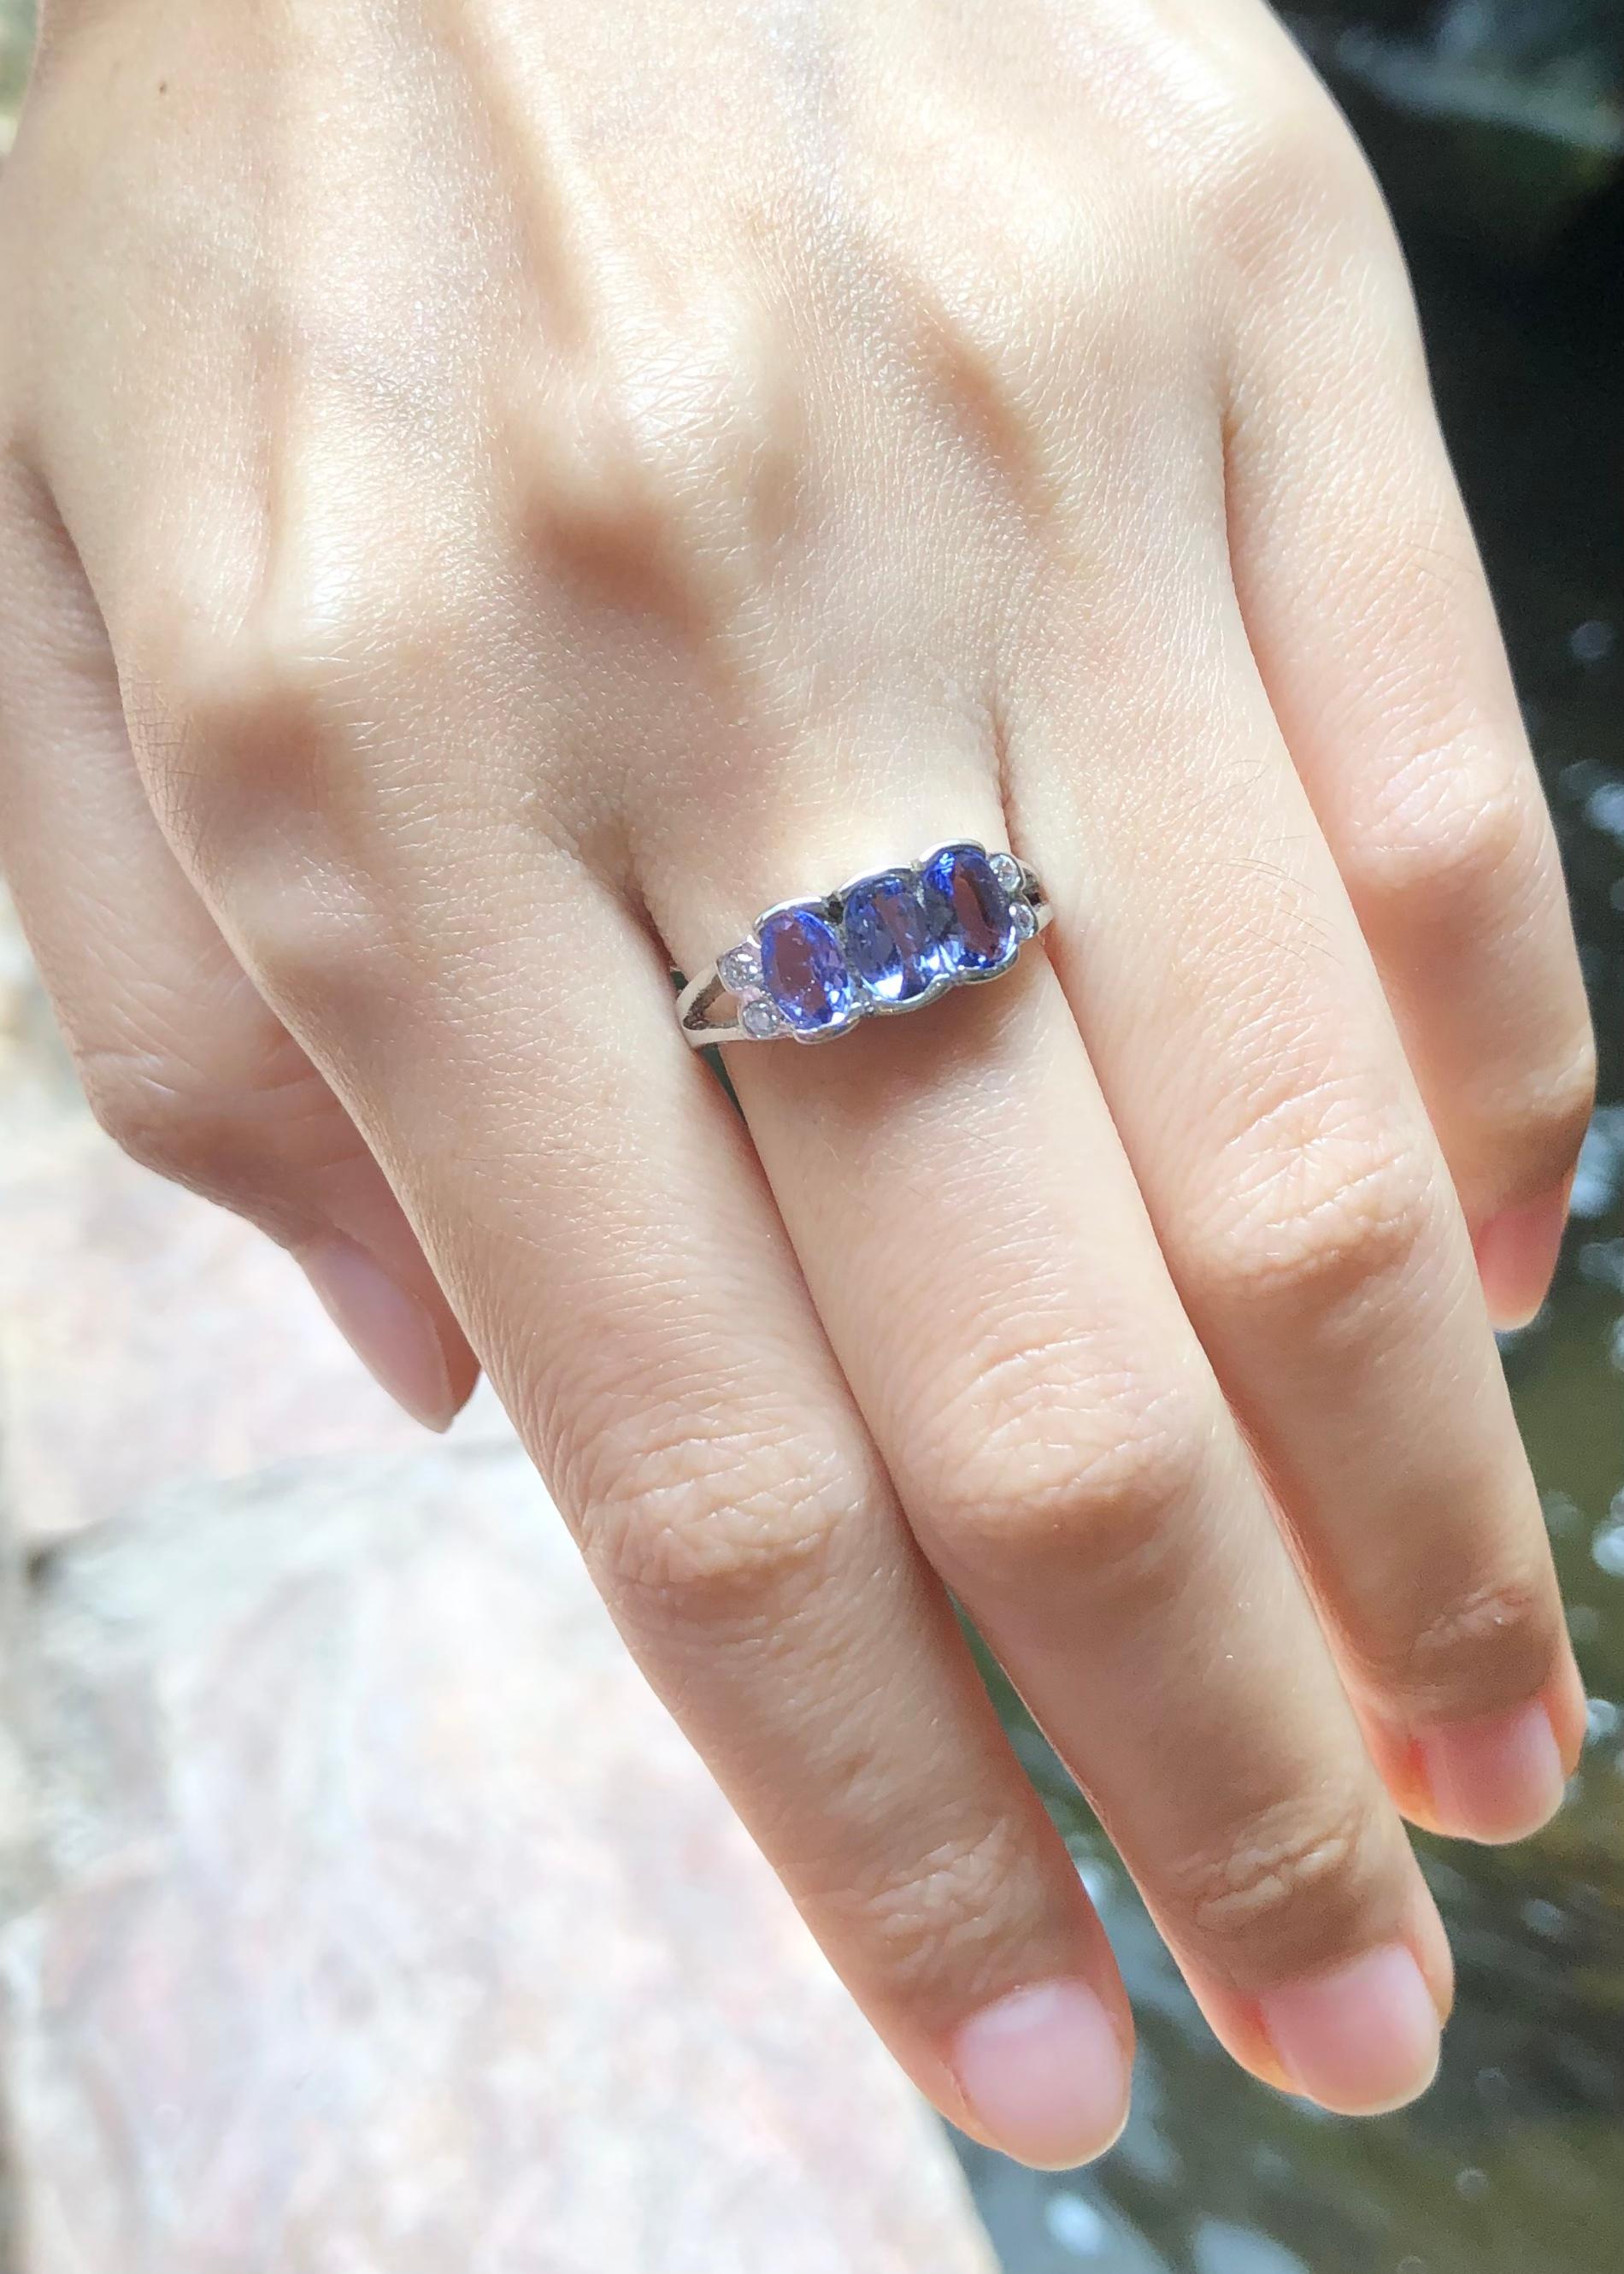 Tanzanite with Cubic Zirconia Ring set in Silver Settings

Width:  1.2 cm 
Length: 0.7 cm
Ring Size: 54
Total Weight: 2.86 grams

*Please note that the silver setting is plated with rhodium to promote shine and help prevent oxidation.  However, with